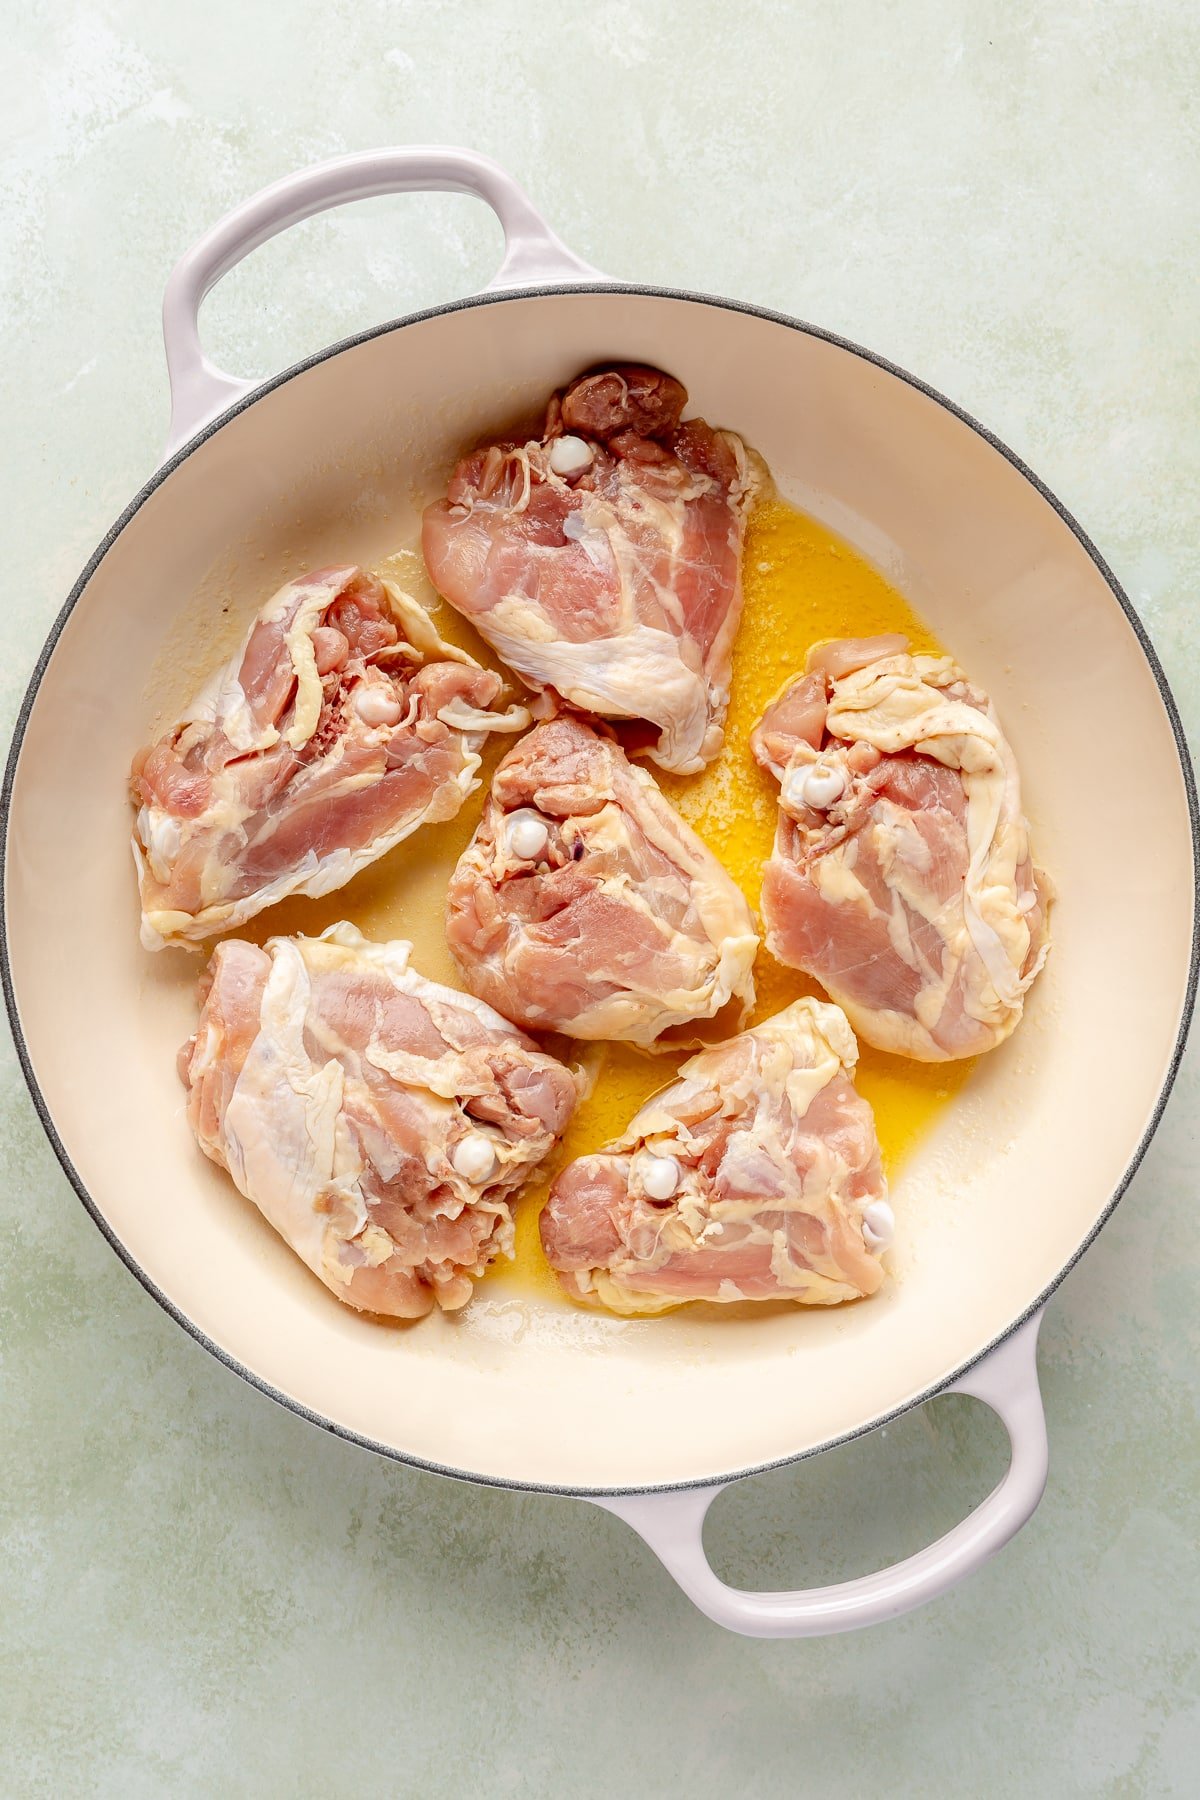 6 chicken thighs have been placed in a white enameled pot with a yellow oil.